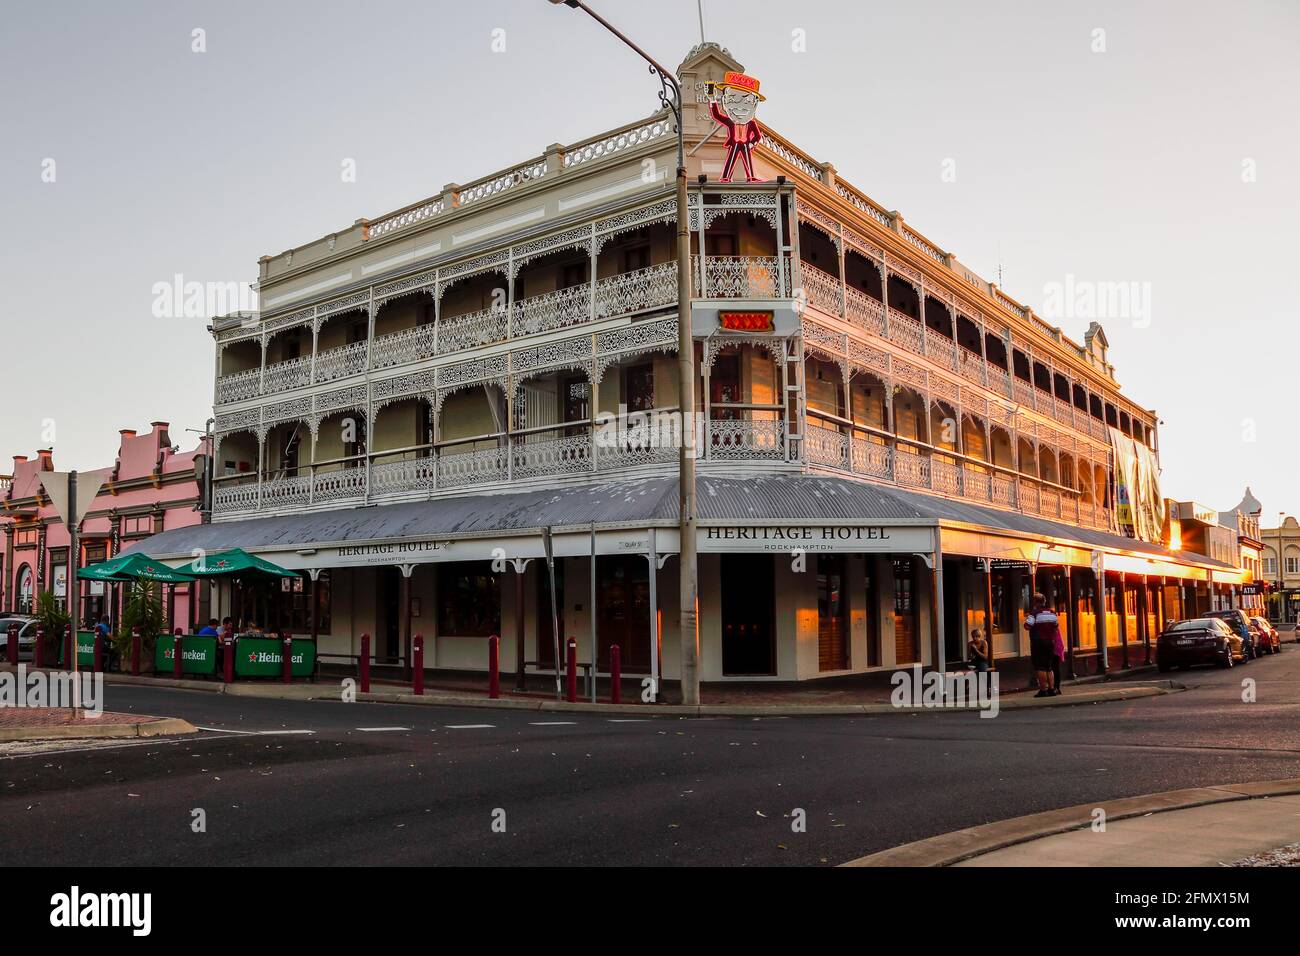 Rockhampton, Qld, Australia - 24 December 2014. The historic Heritage Hotel, built in 1898, is a balconied hotel with prominent iron lace decorations. Stock Photo